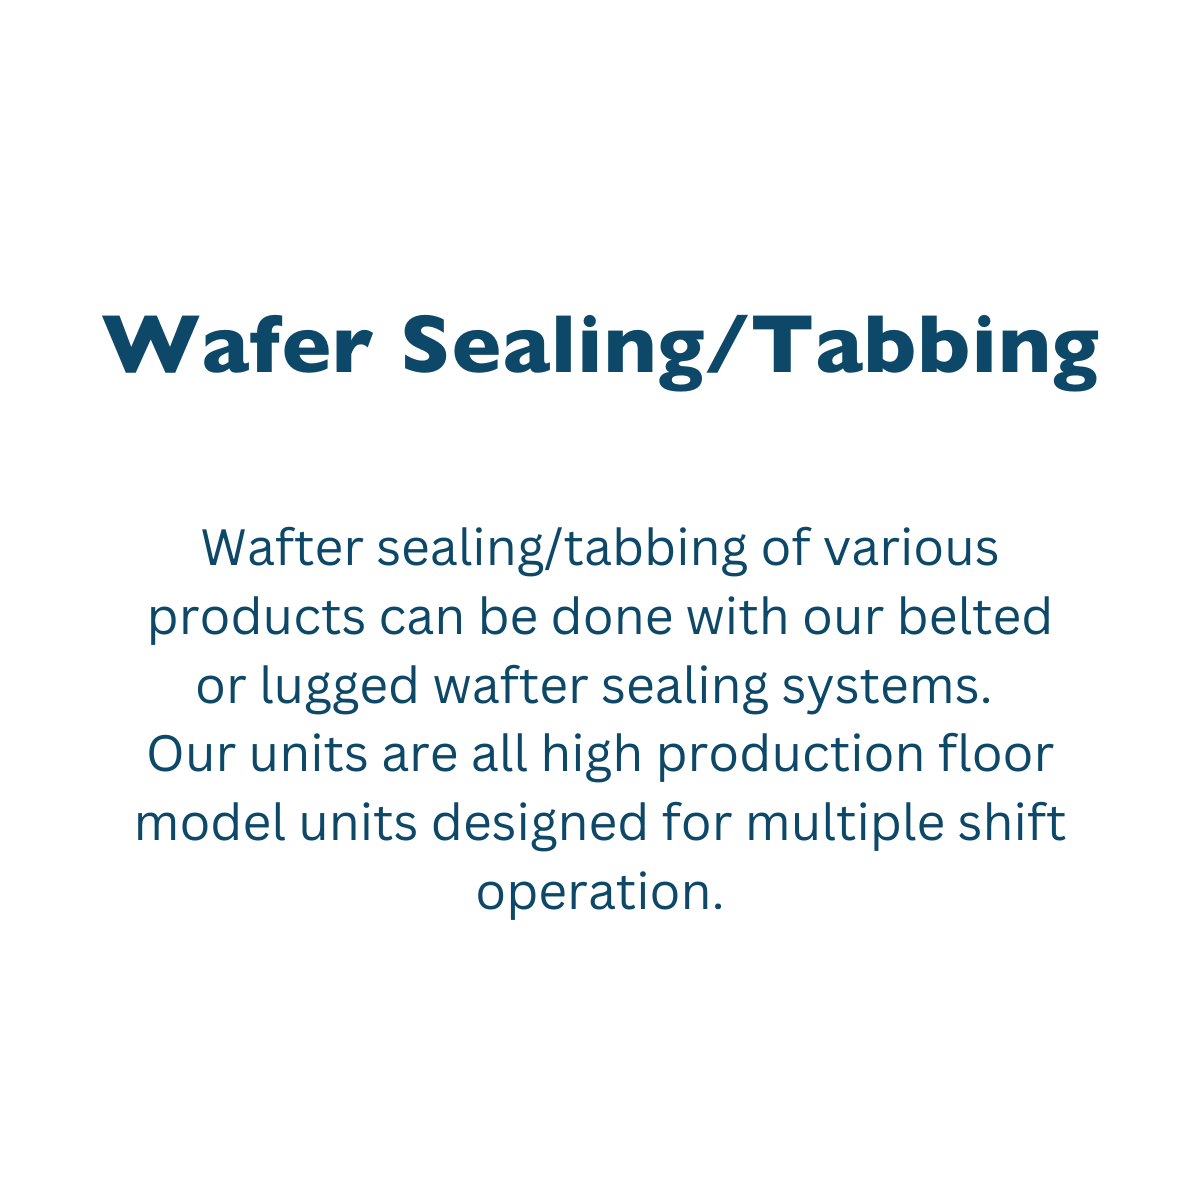 Wafter sealing/tabbing of various products can be done with our belted or lugged wafter sealing systems.<br />
Our units are all high production floor model units designed for multiple shift operation.